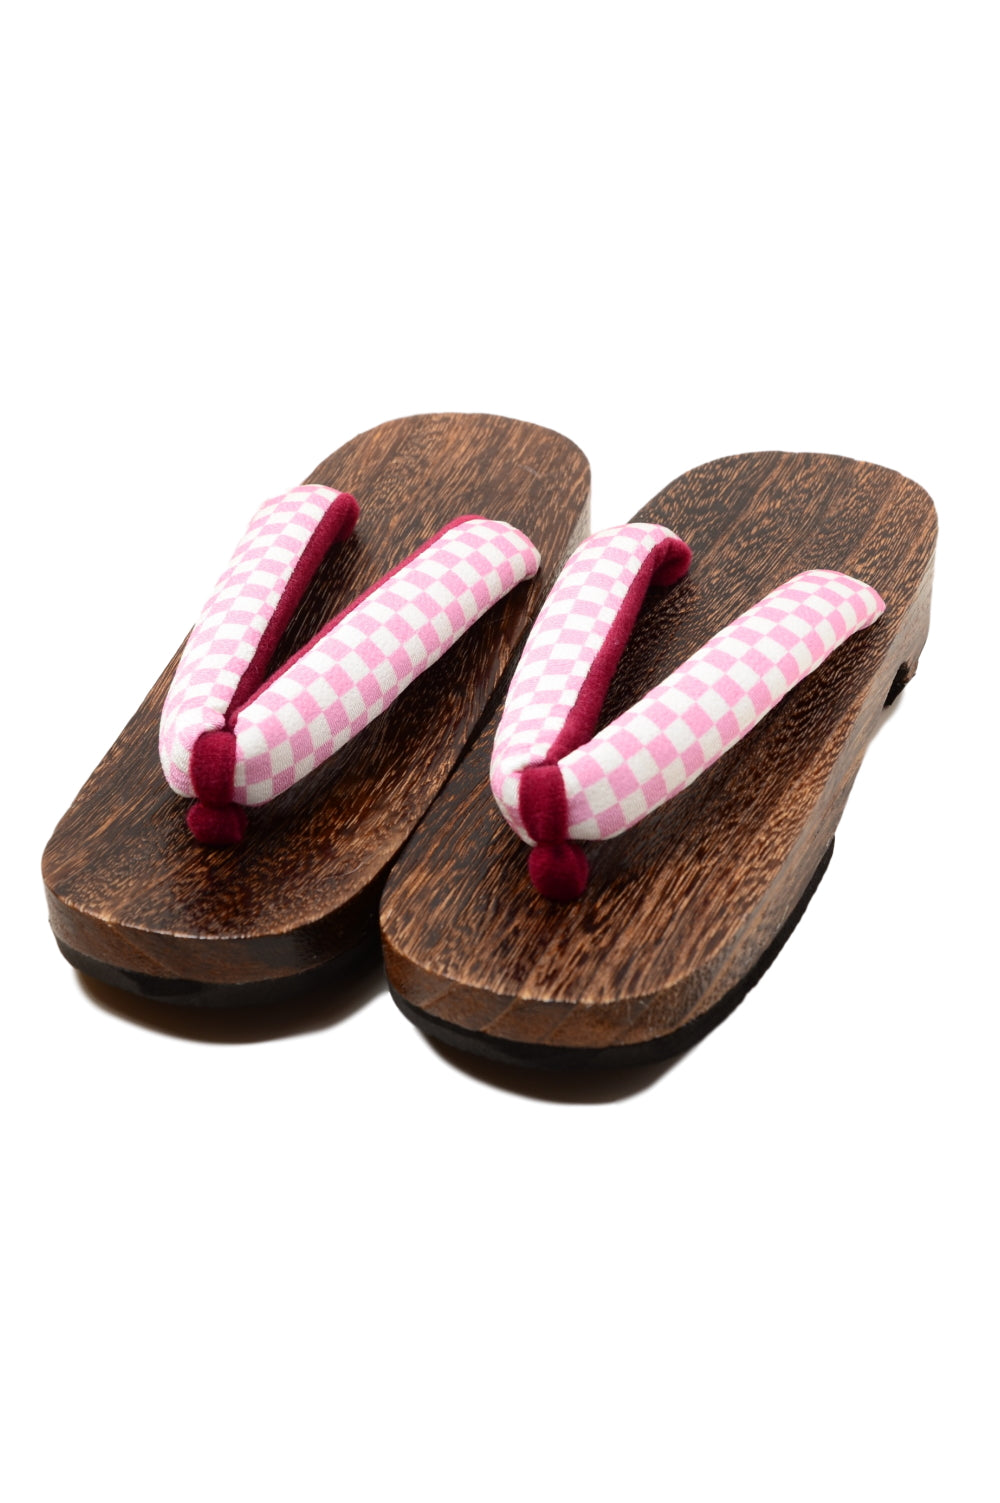 Japanese Geta Anime Coplay Shoes Cos Wedge Sandals Women Slippers Wooden  Sole Flip Flops Slippers Japanese Geta Clogs Shoes - AliExpress